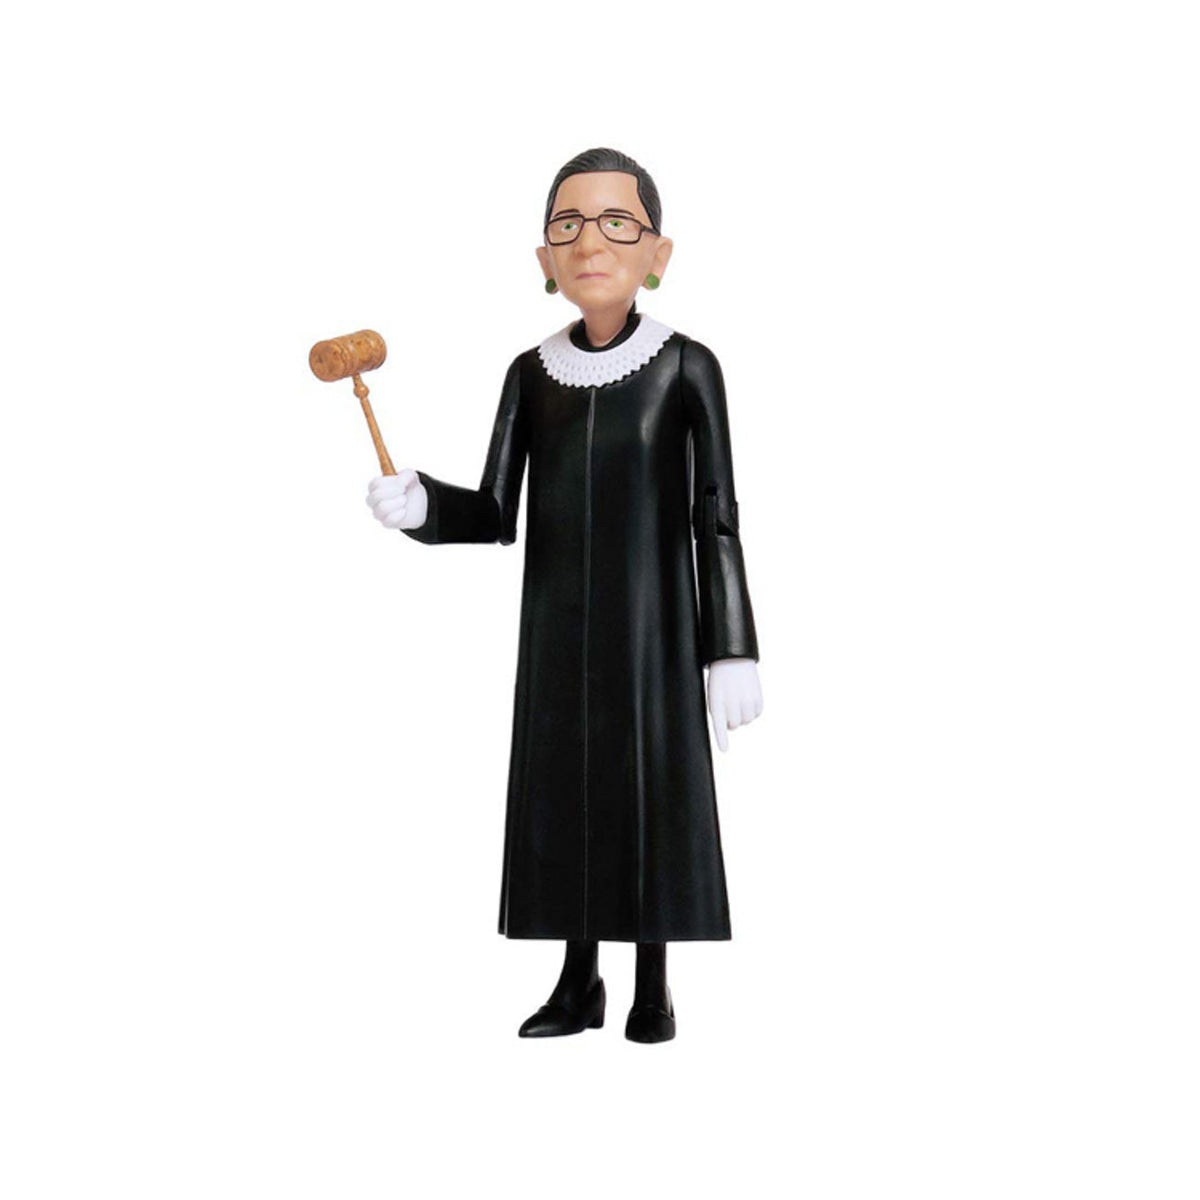 Justice Ruth Baber Ginsburg Action Figure